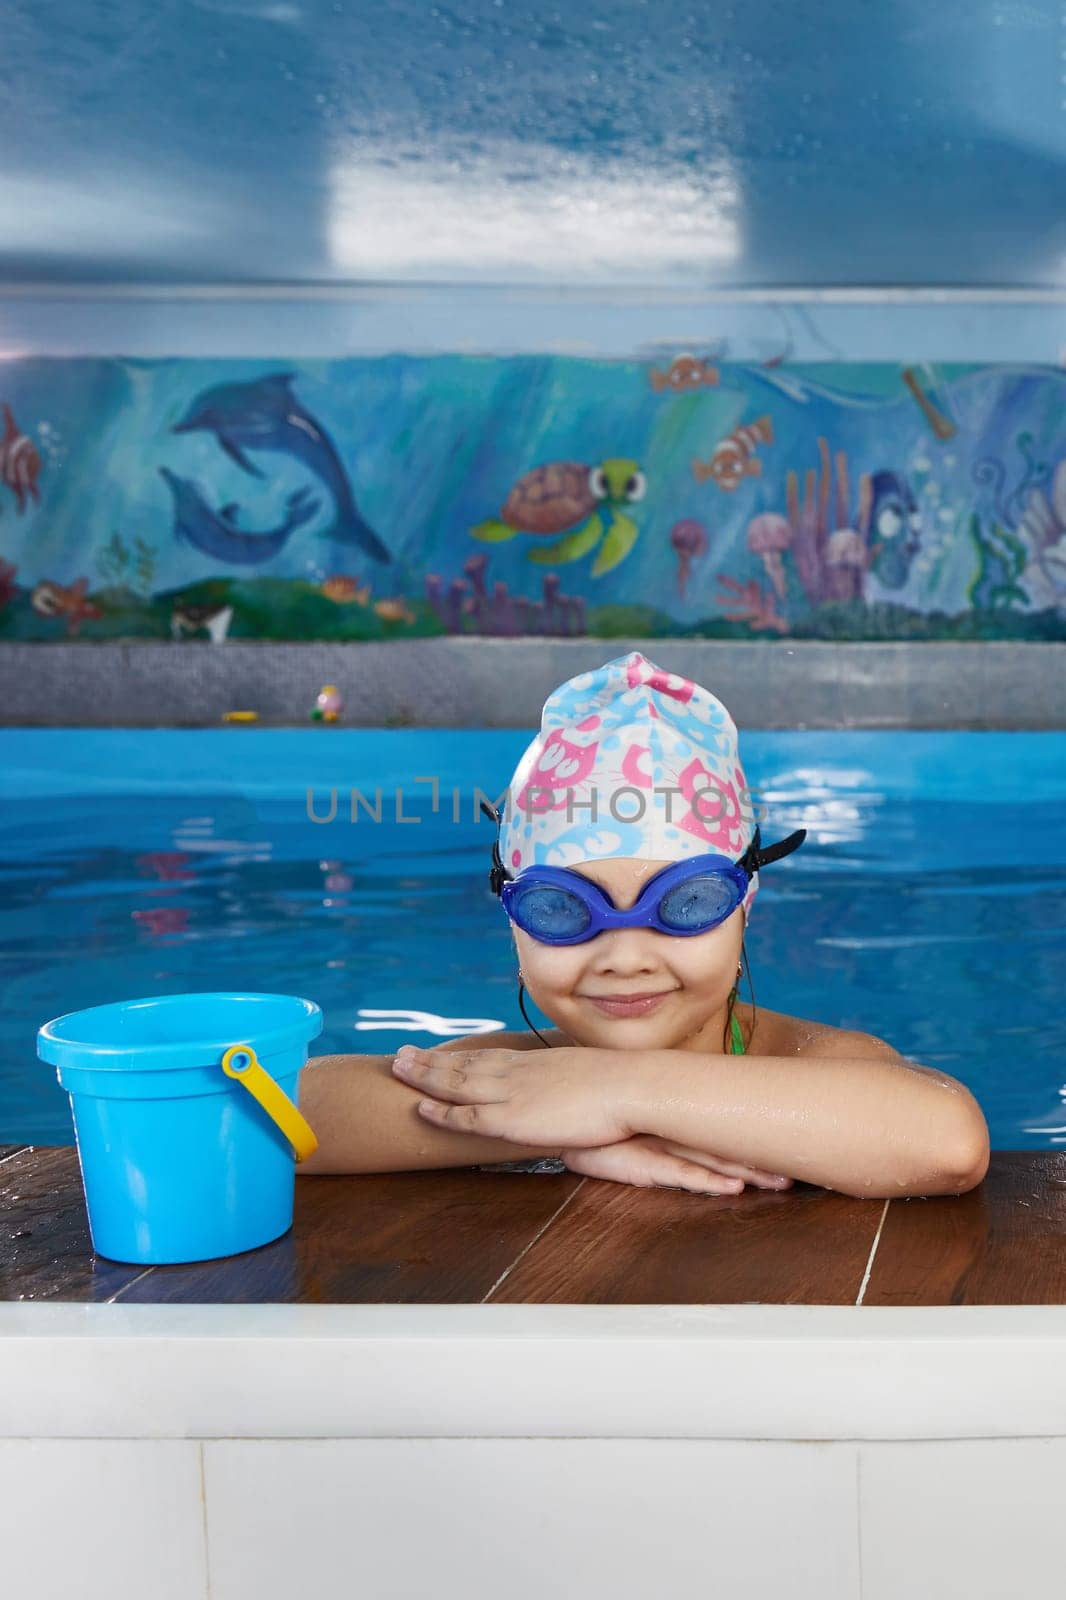 Kids taking a break during swimming class in the indoor pool